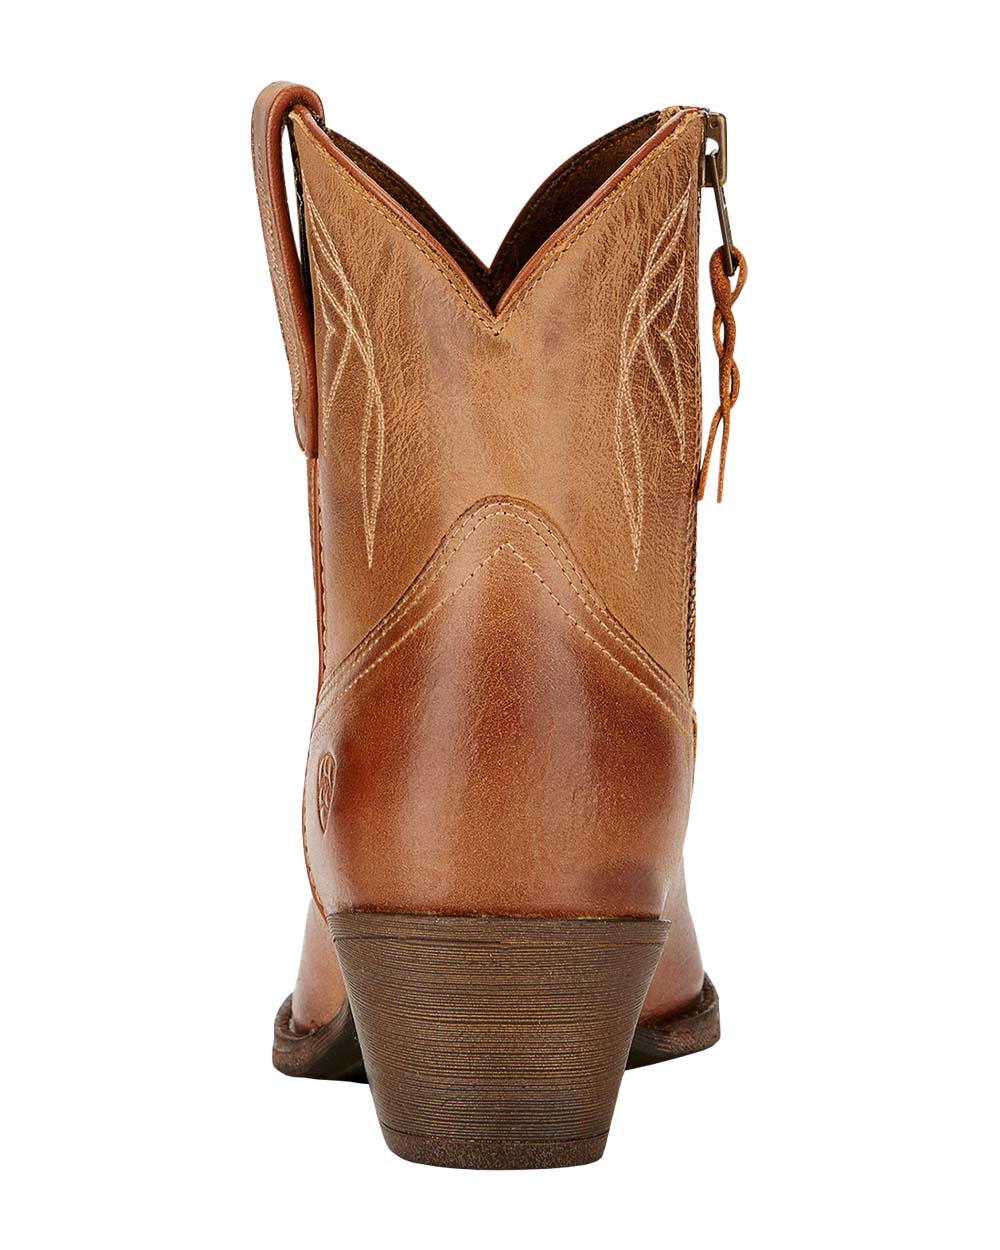 Burnt Sugar coloured Ariat Womens Darlin Western Boot on White background 